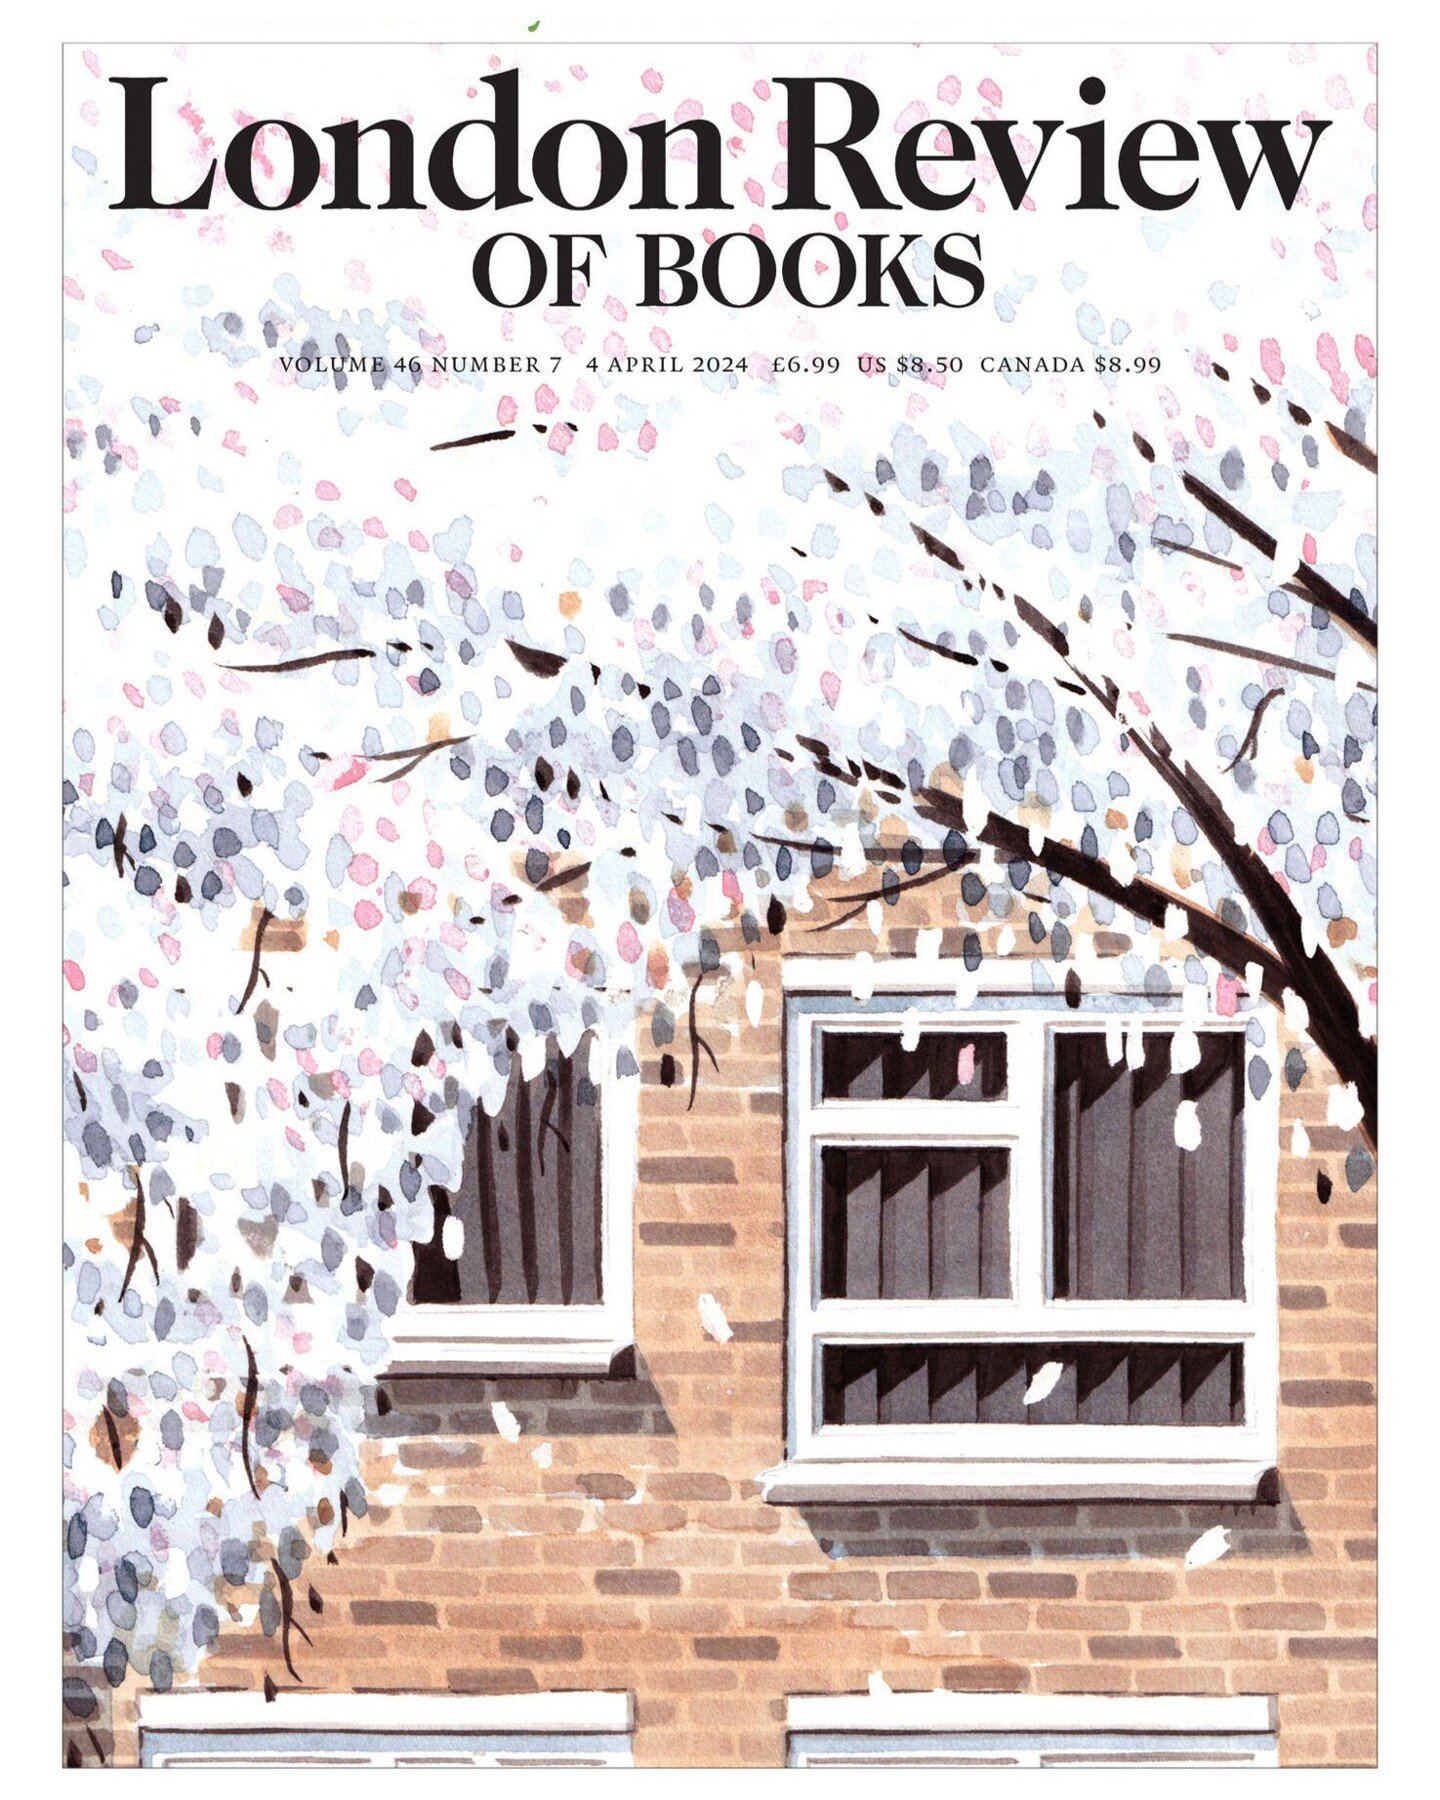 'March Blossoms' - ink and watercolour by @jonmcn on the latest issue of @londonreviewofbooks 

#londonblossom #londonblossoms #springhassprung